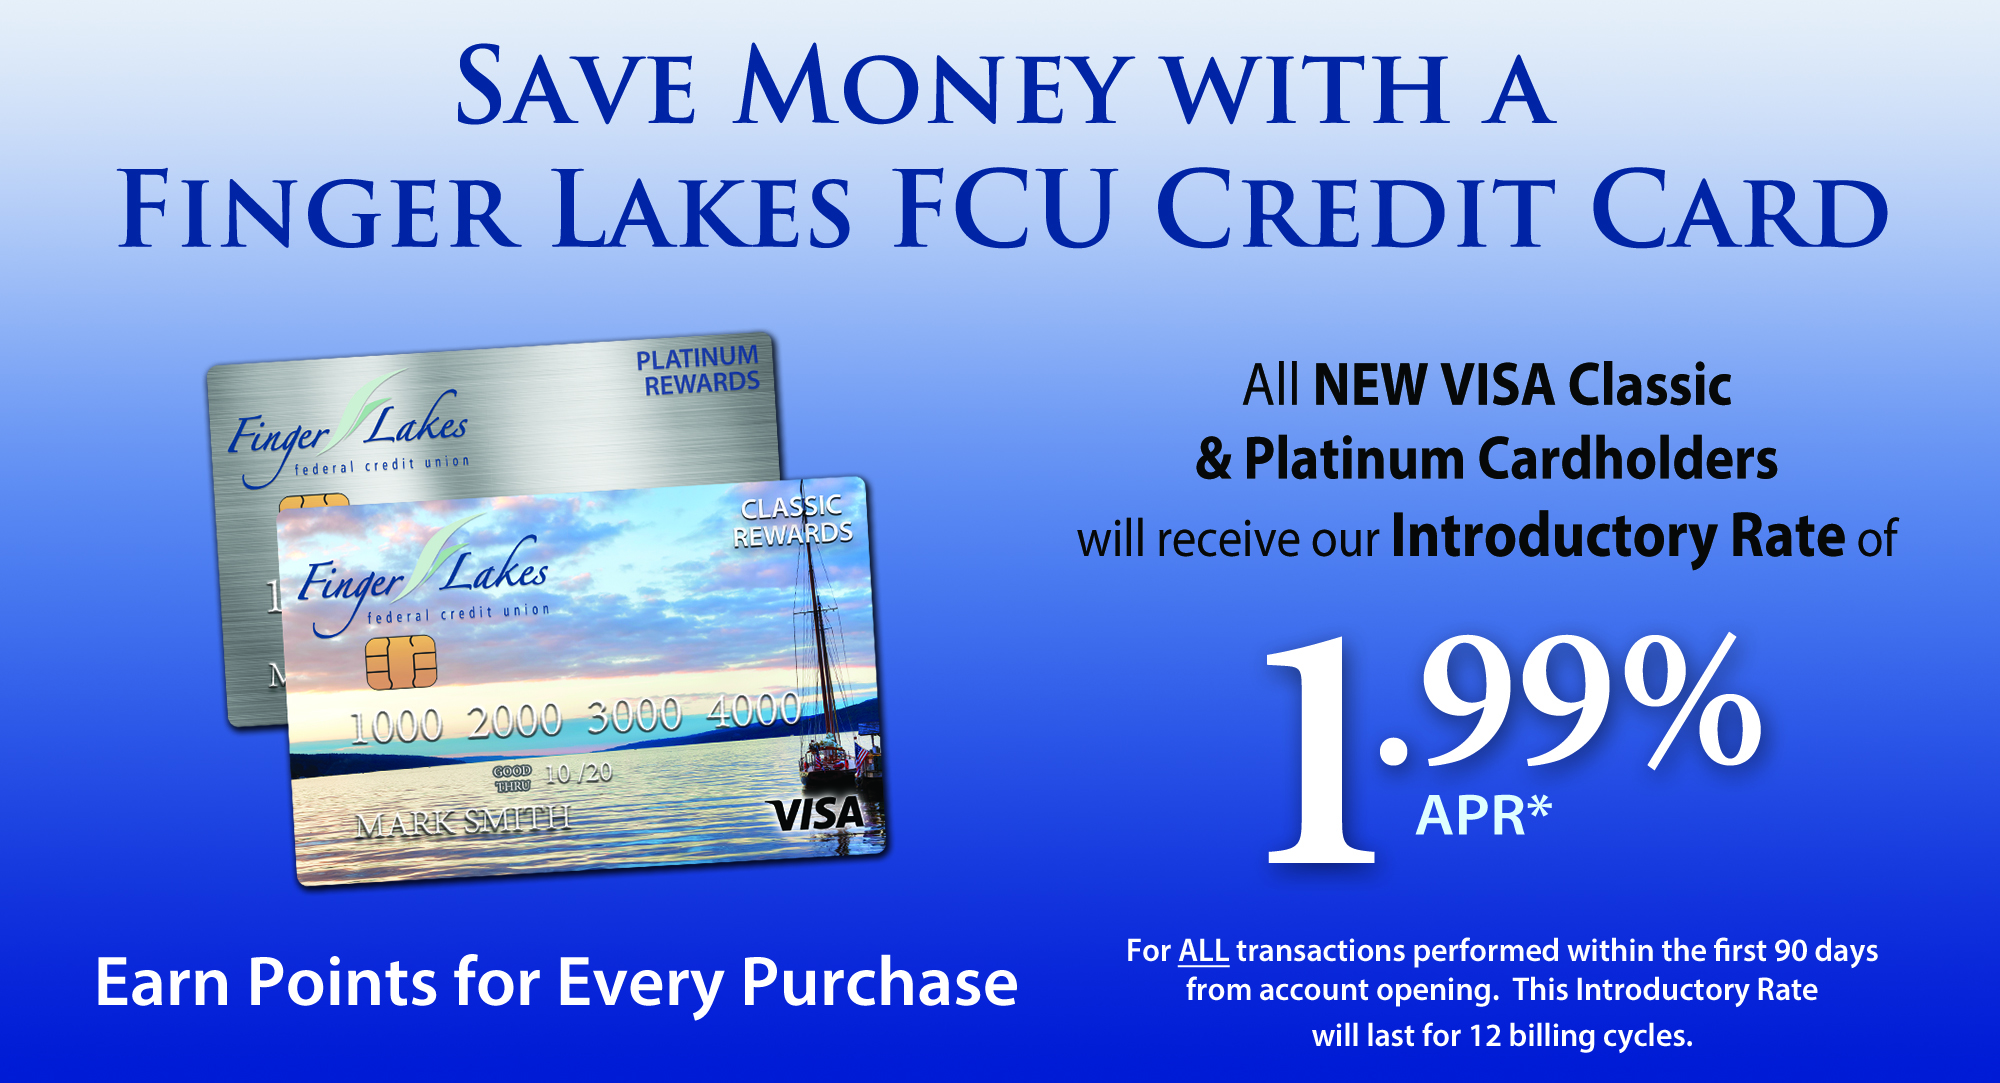 Save money with a Finger Lakes FCU credit card. All new VISA classic and platinum cardholders will receive our Introductory rate of 1.99% APR. Earn points for every purchase. Restrictions may apply.